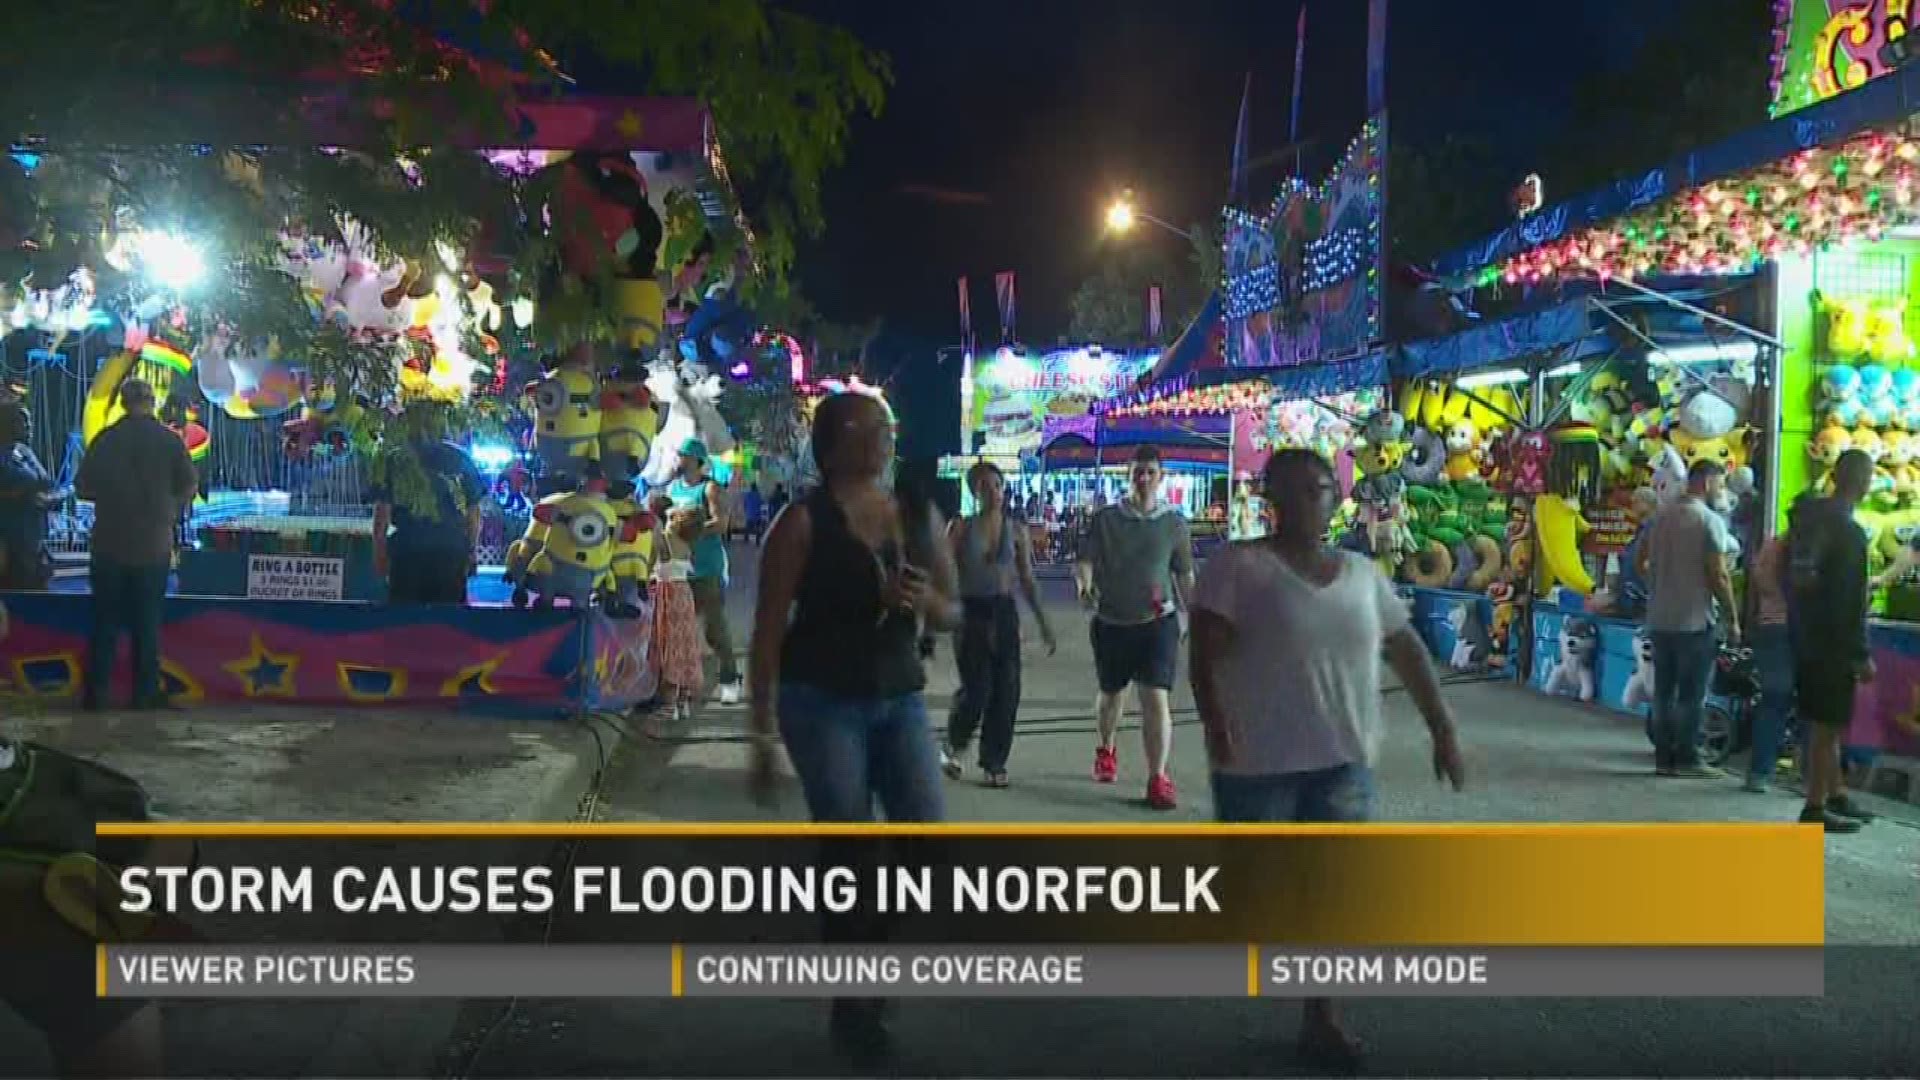 Mount Trashmore carnival closes early because of weather